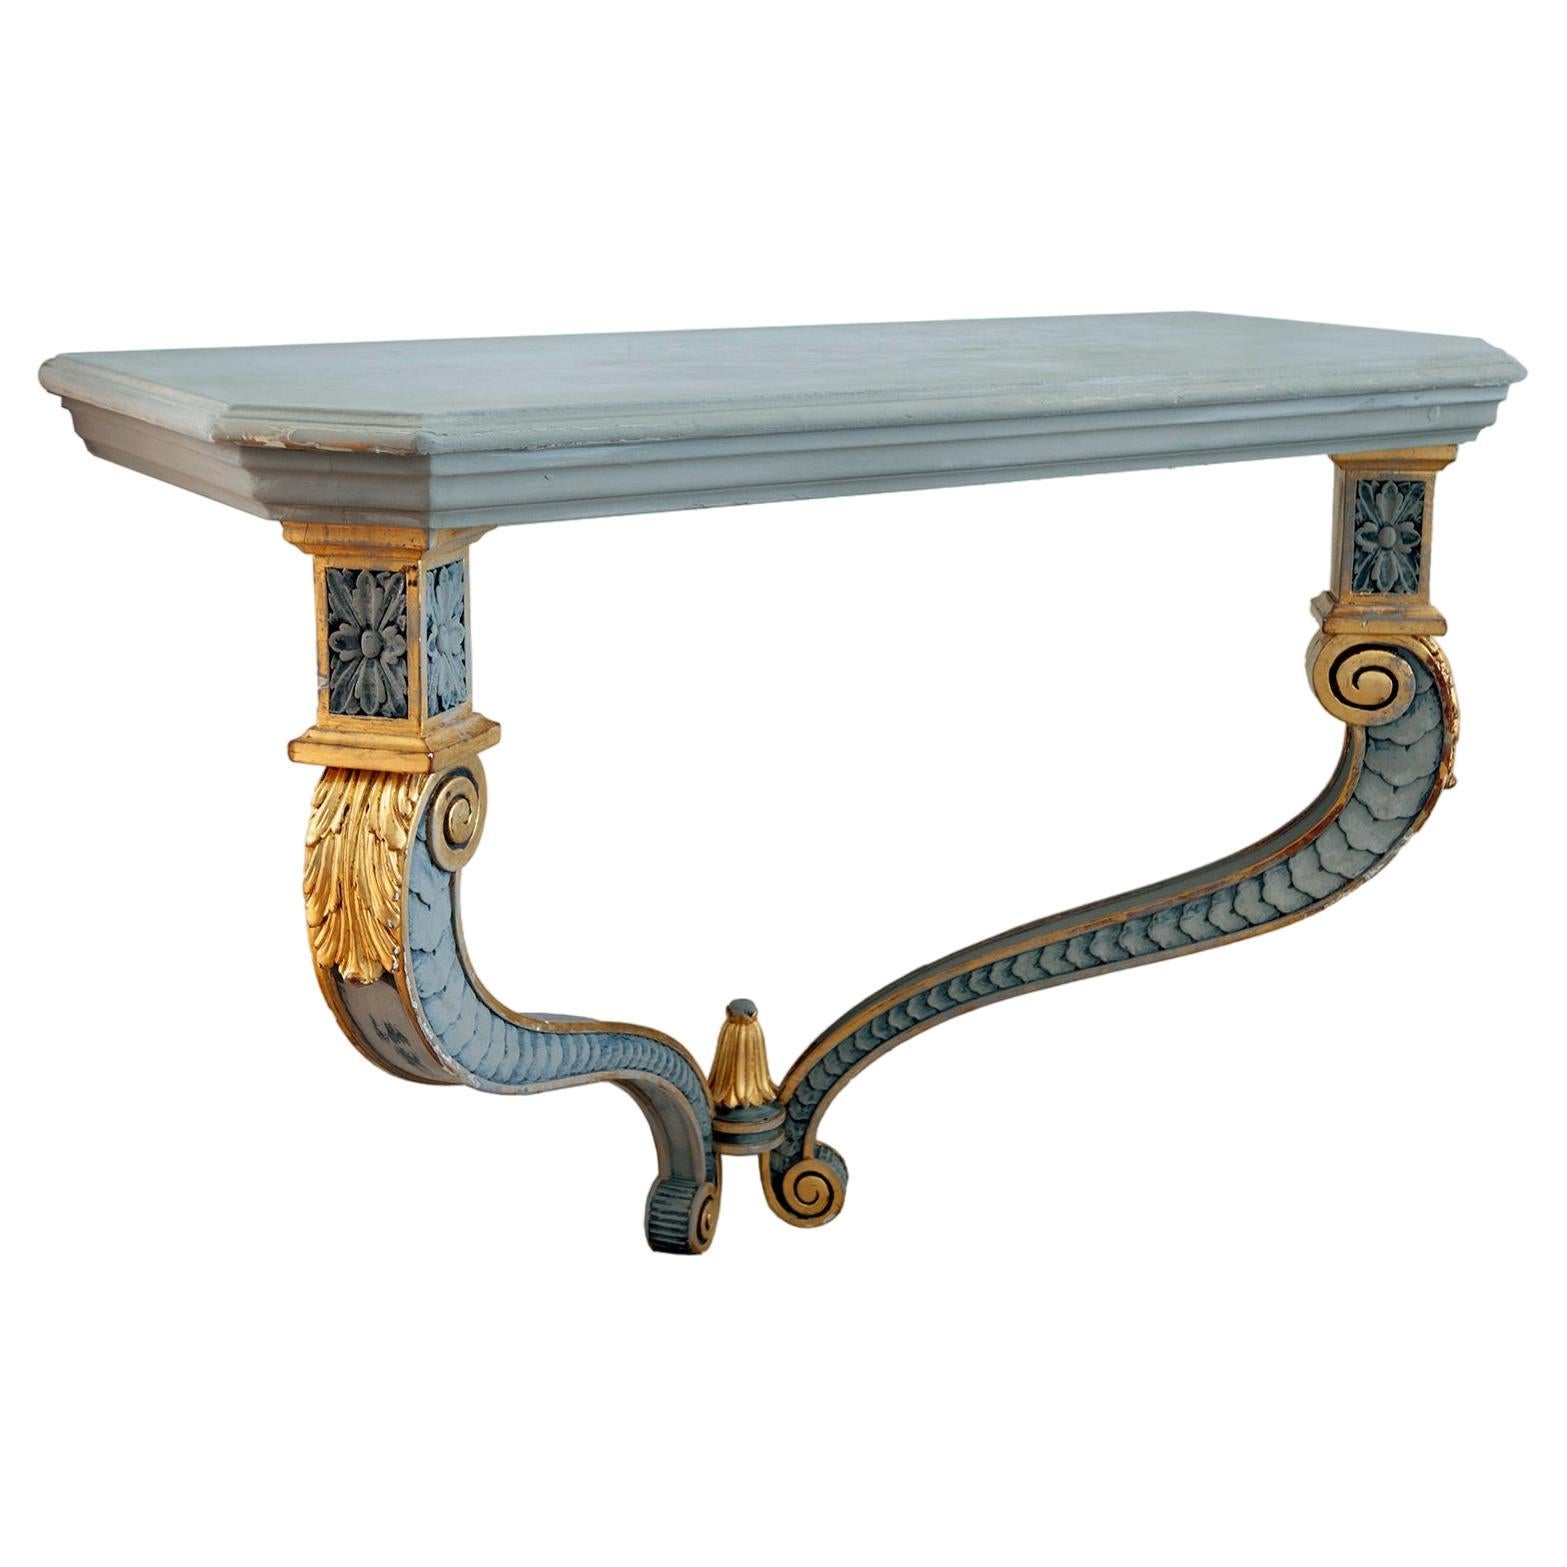 Gilt & carved hand-crafted 20th century Italian Renaissance Venetian style wall mounted console table, hand painted & carved with gilt accents.
The elaborately carved legs are accented with gilt & warm gray carving. The gilt trimmed legs meet at the